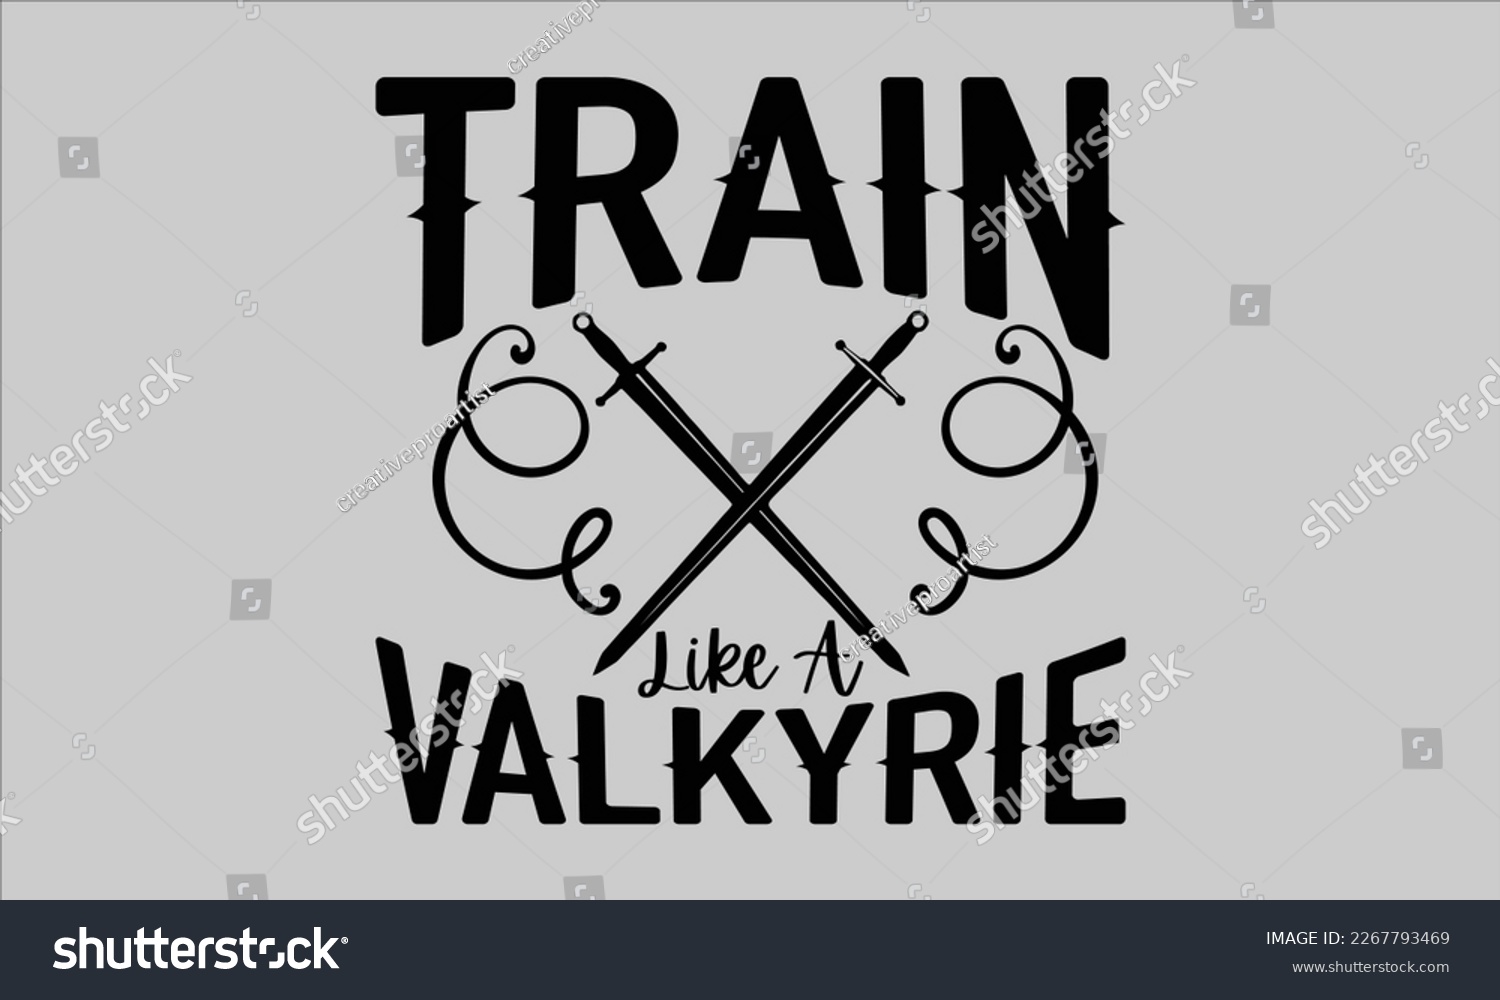 SVG of Train like a Valkyrie- Train t-shirt and svg design, Calligraphy graphic design, Hand drew lettering phrases, white background For stickers, templet, mugs, etc. eps 10 svg